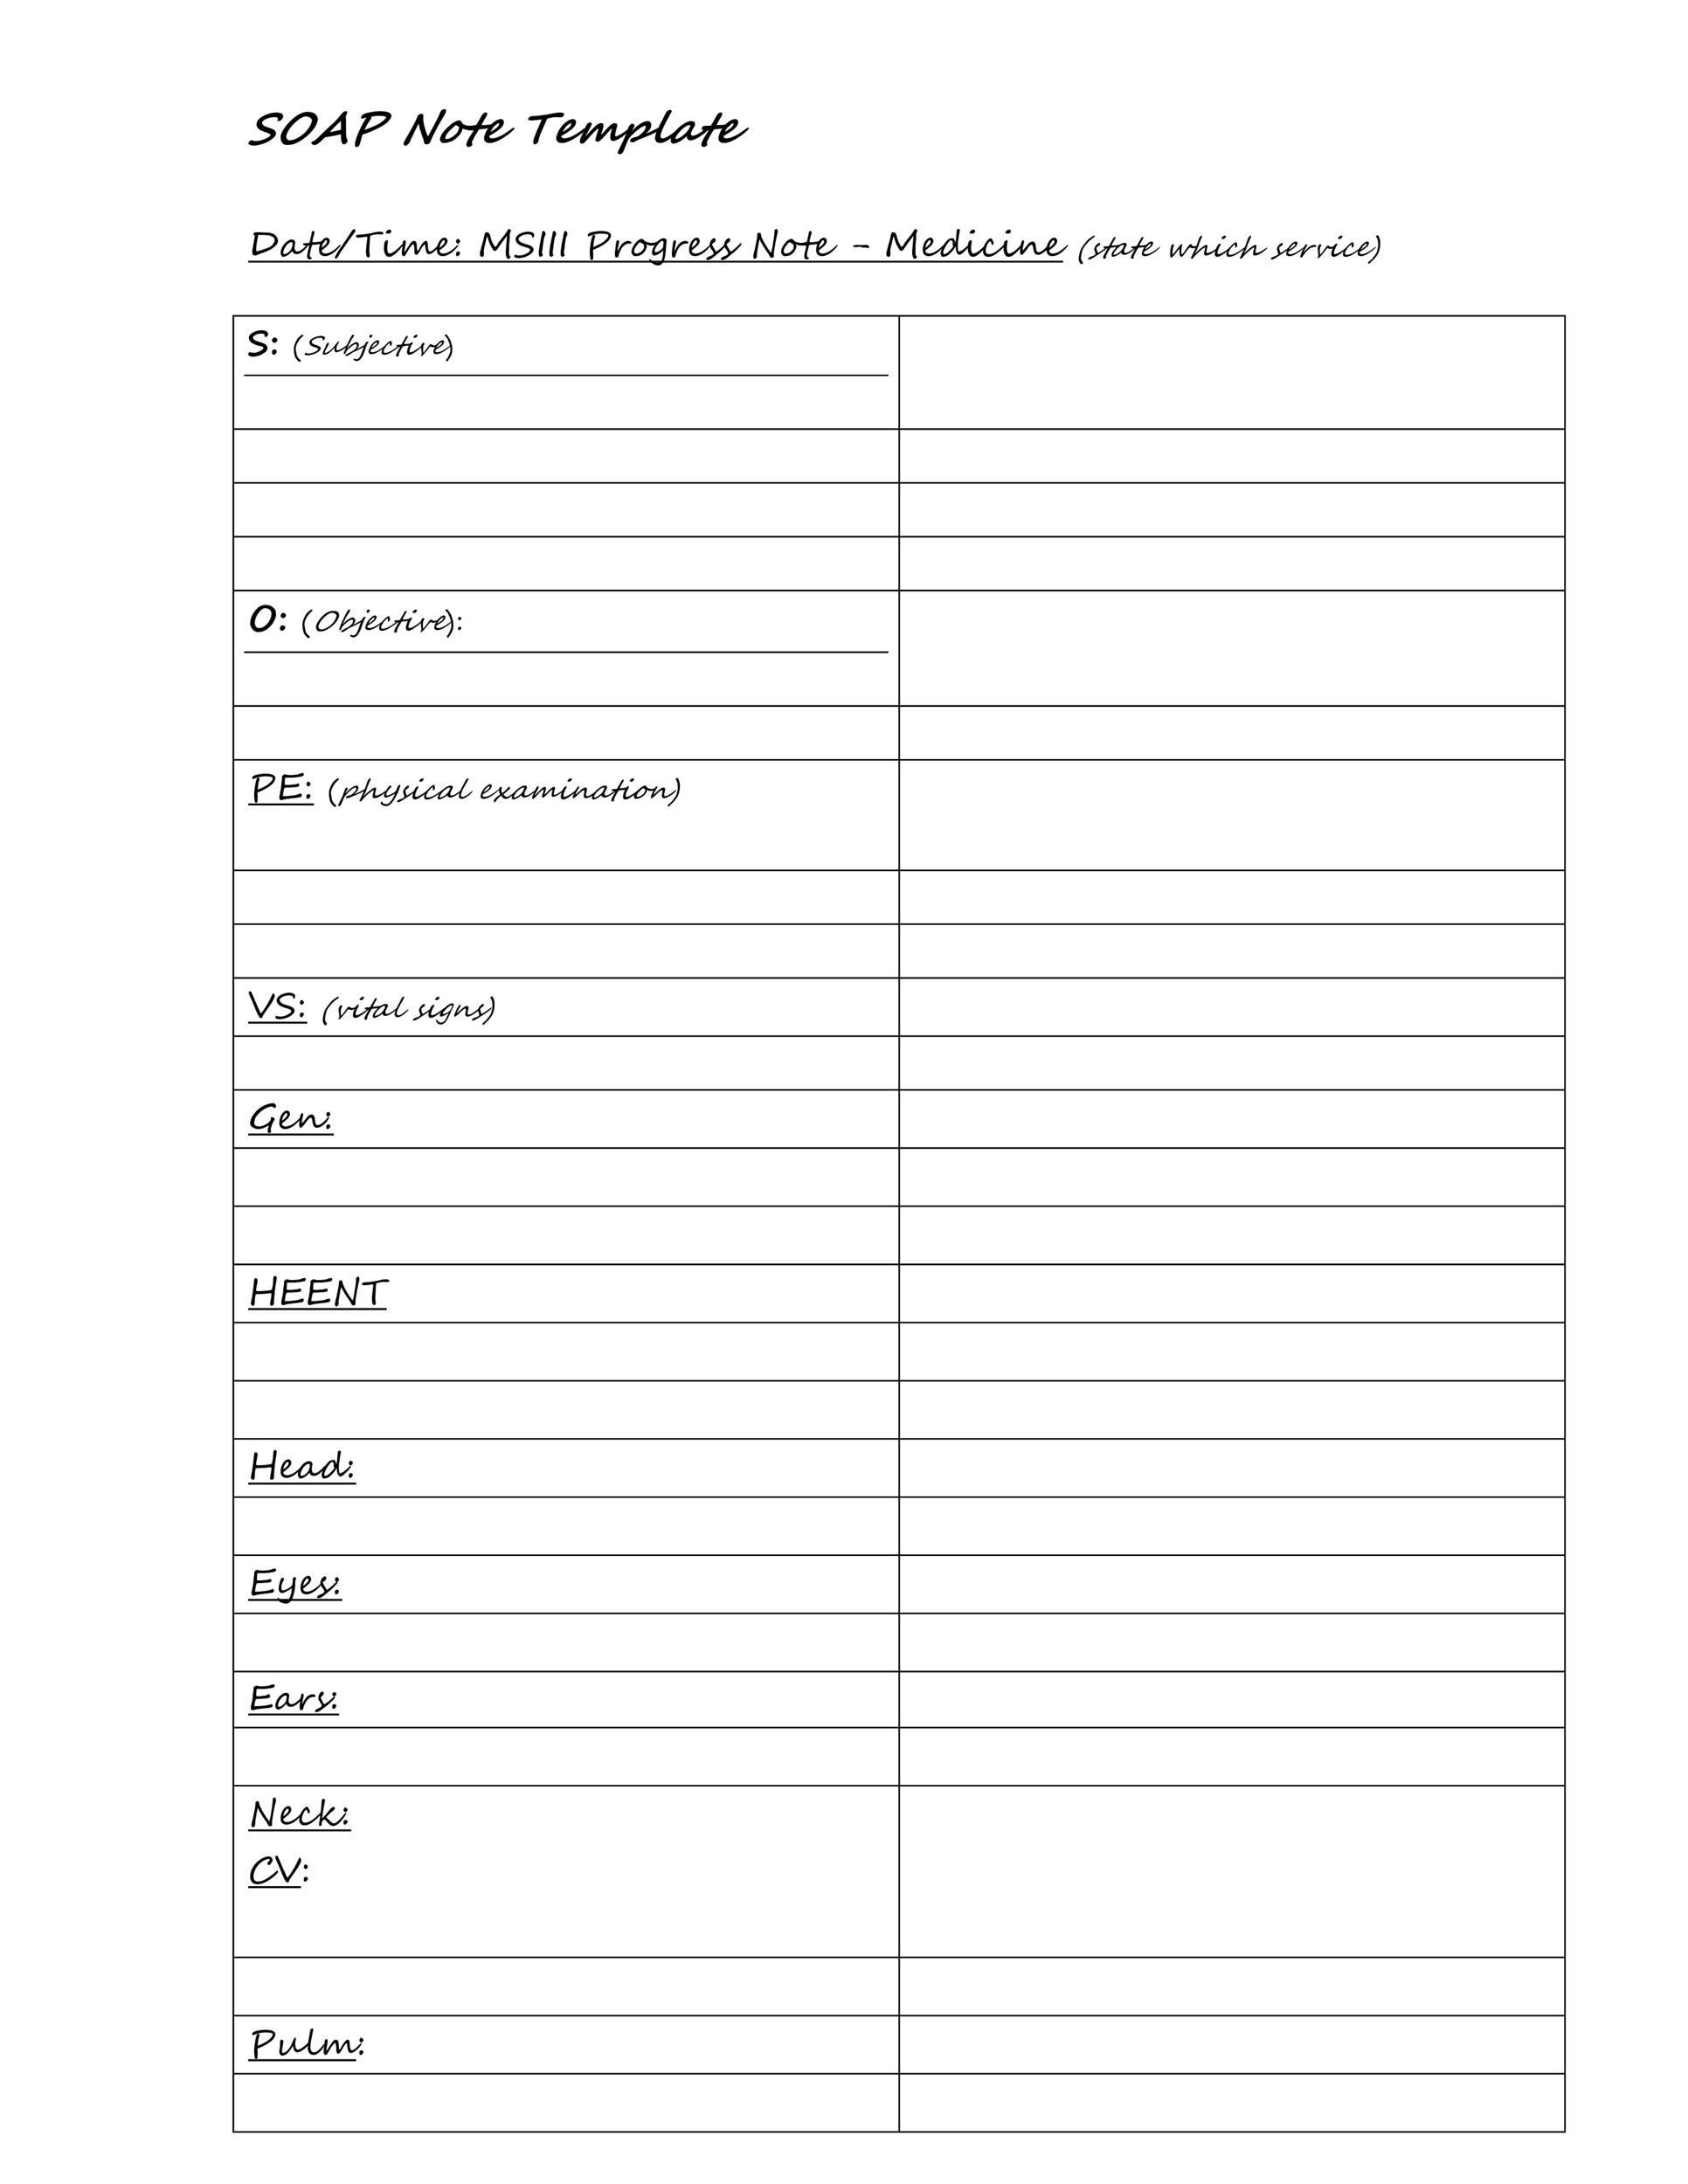 Free Soap Note Template 09